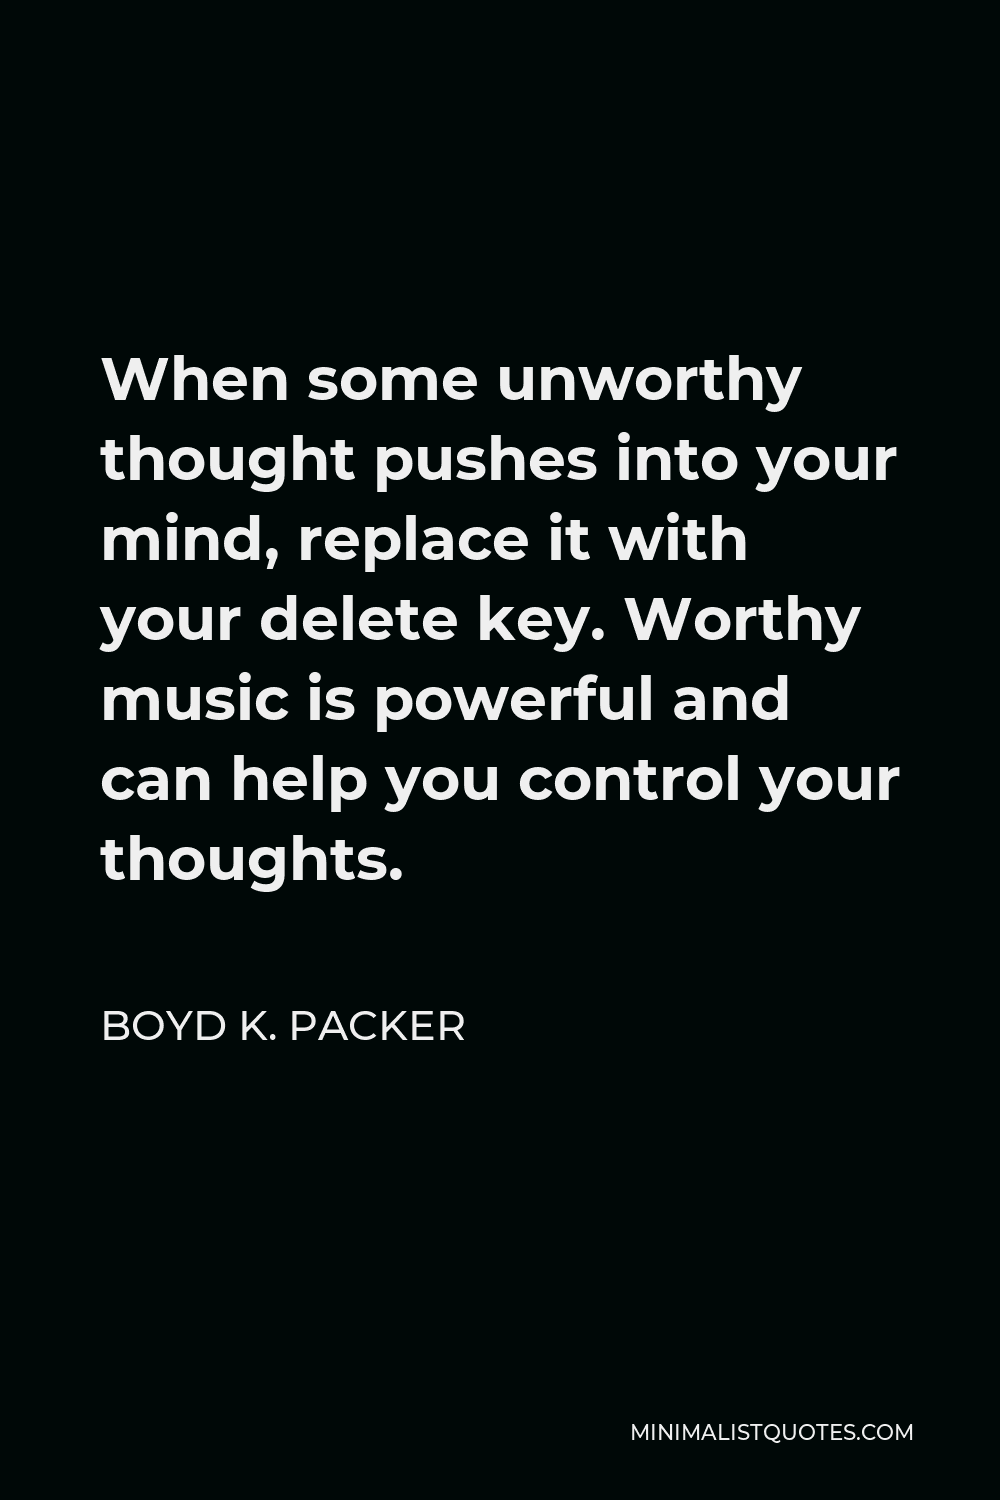 Boyd K. Packer Quote - When some unworthy thought pushes into your mind, replace it with your delete key. Worthy music is powerful and can help you control your thoughts.